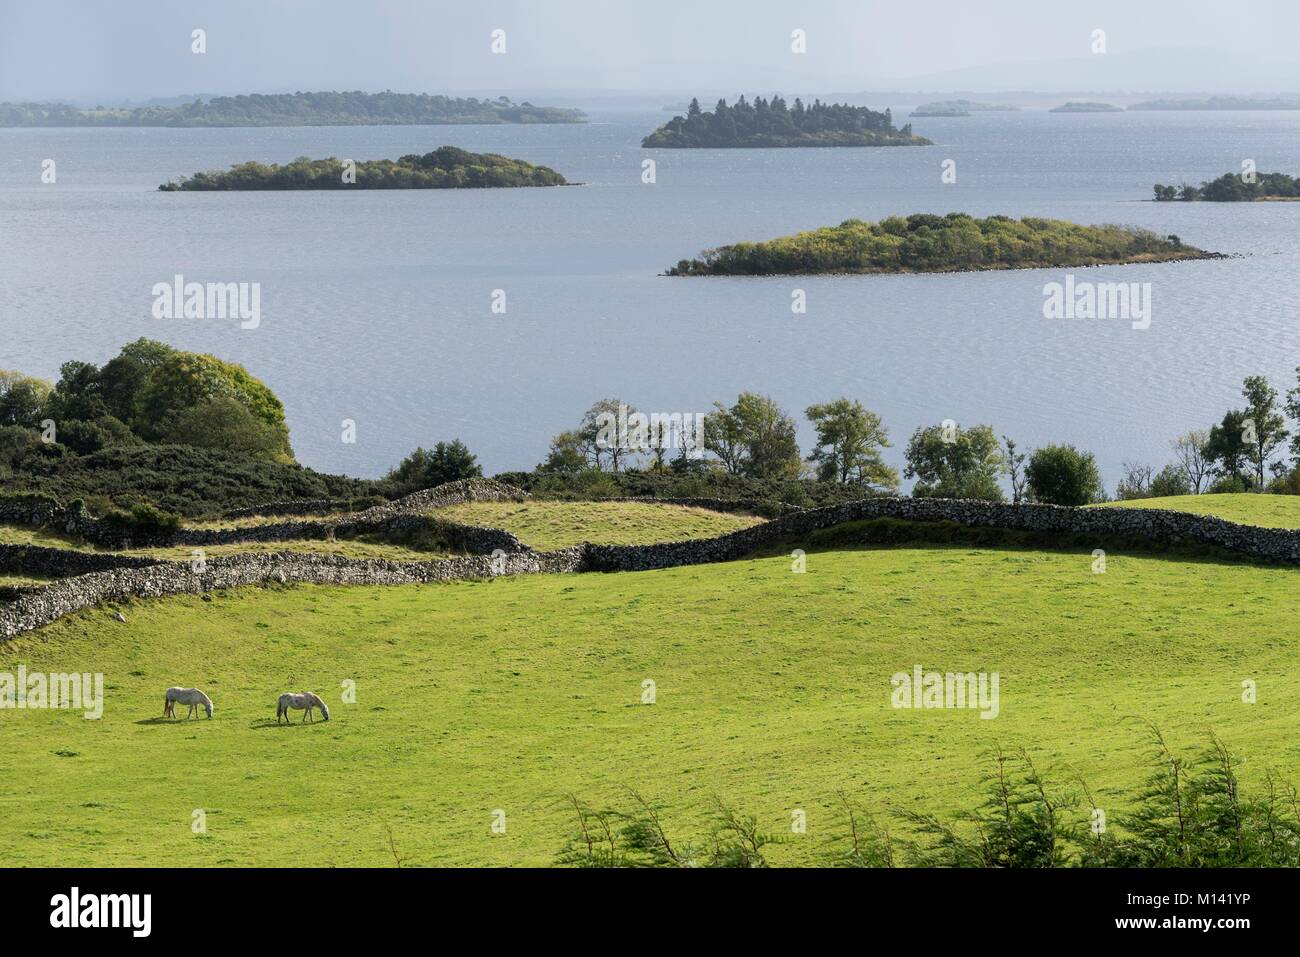 Ireland, County Galway, Connemara National Park, Corrib Lake, pastures delineated by dry stone walls, two horses Stock Photo